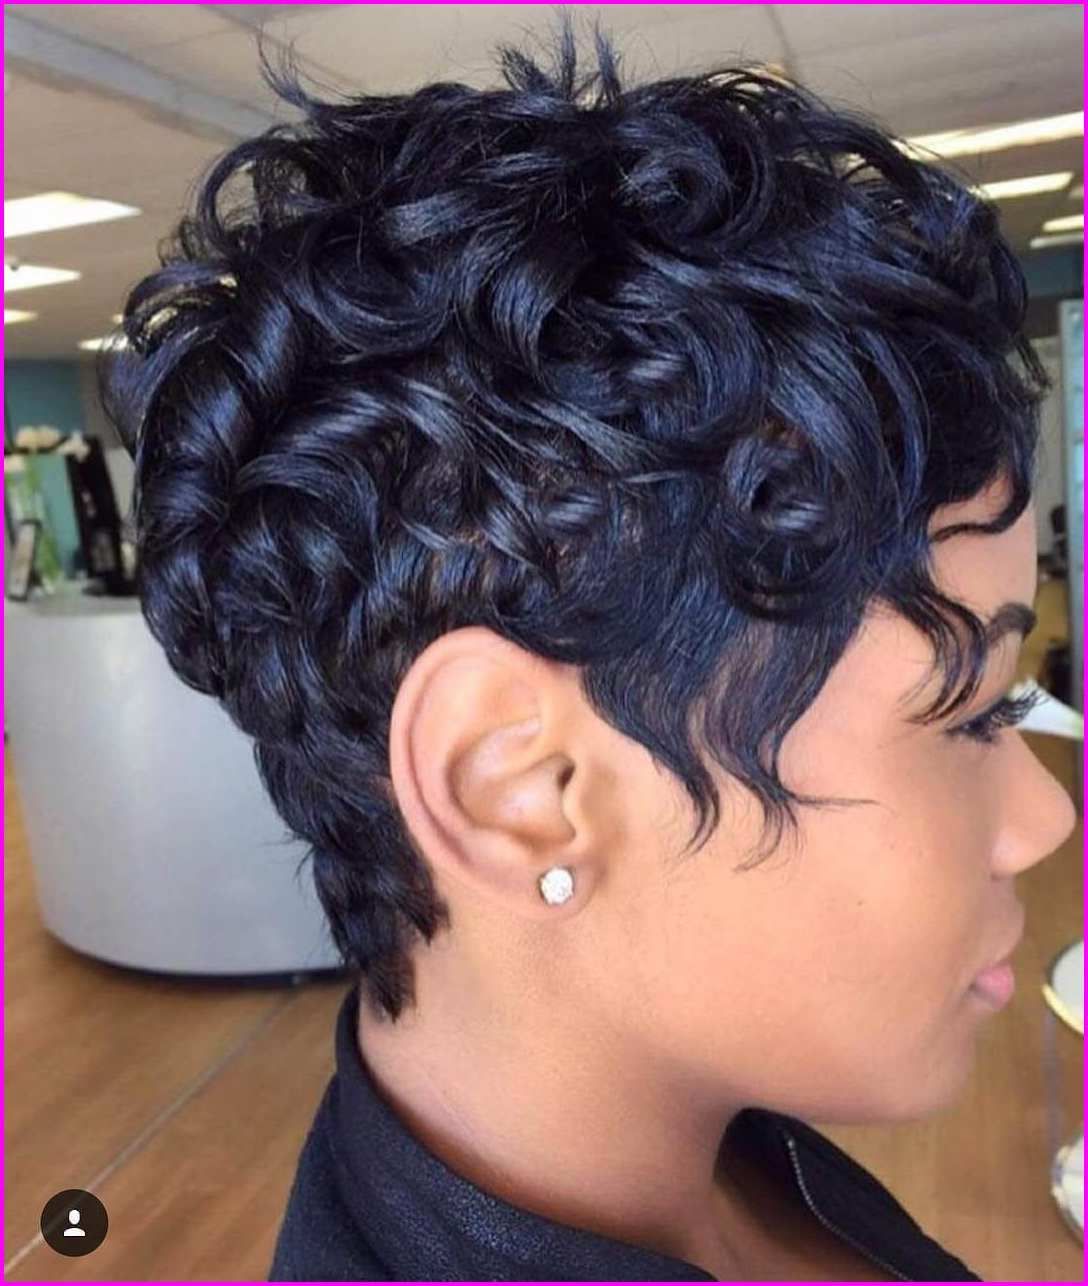 Famous Pixie Mohawk Haircuts For Curly Hair For For Black Women – Curly Pixie & Mohawk (View 4 of 20)